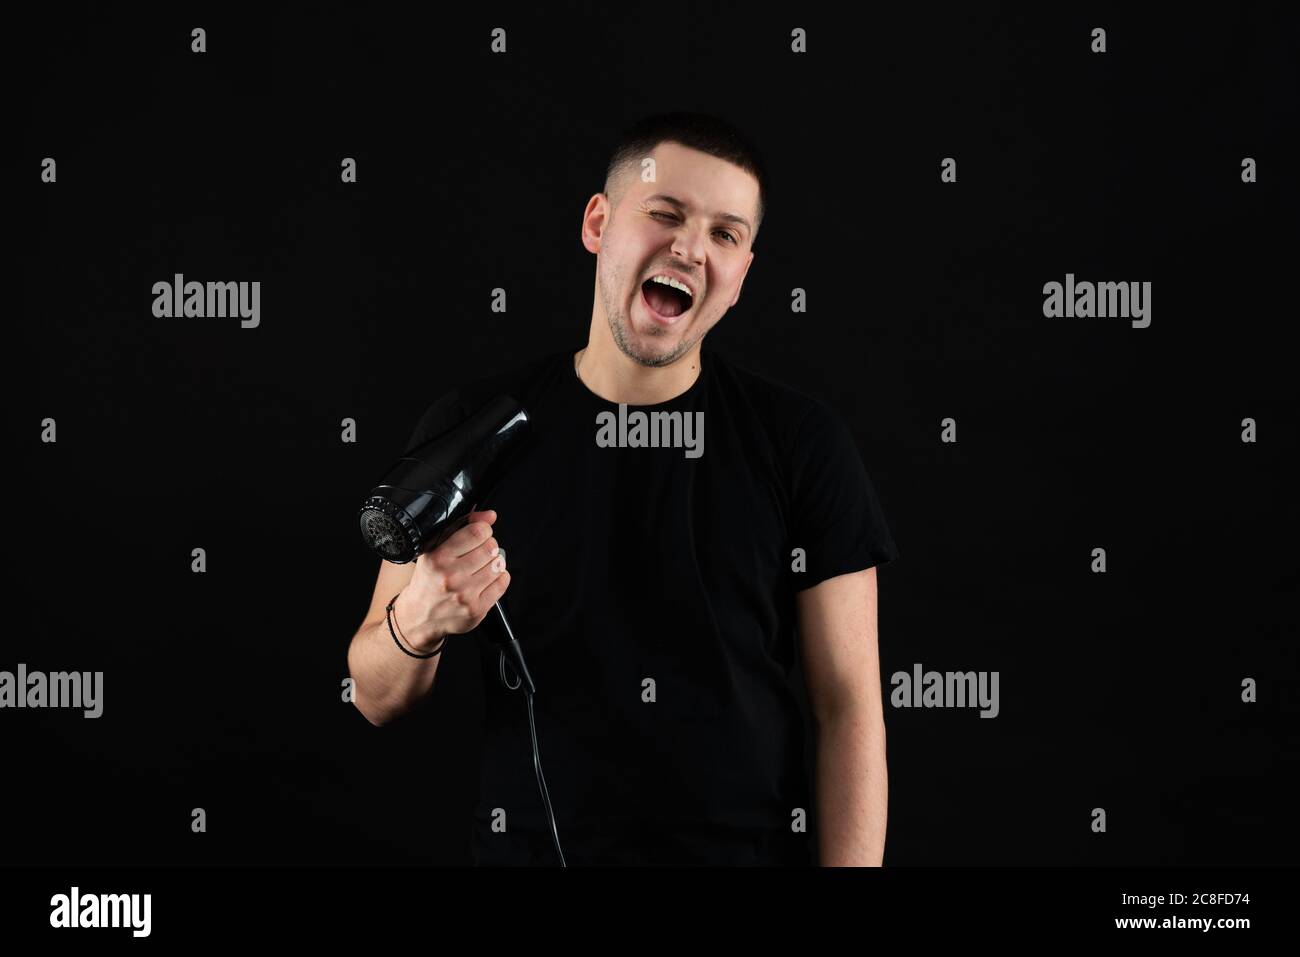 Funny young man 20s years old in black t-shirt hold blow dry hair isolated on black wall background, studio portrait Stock Photo